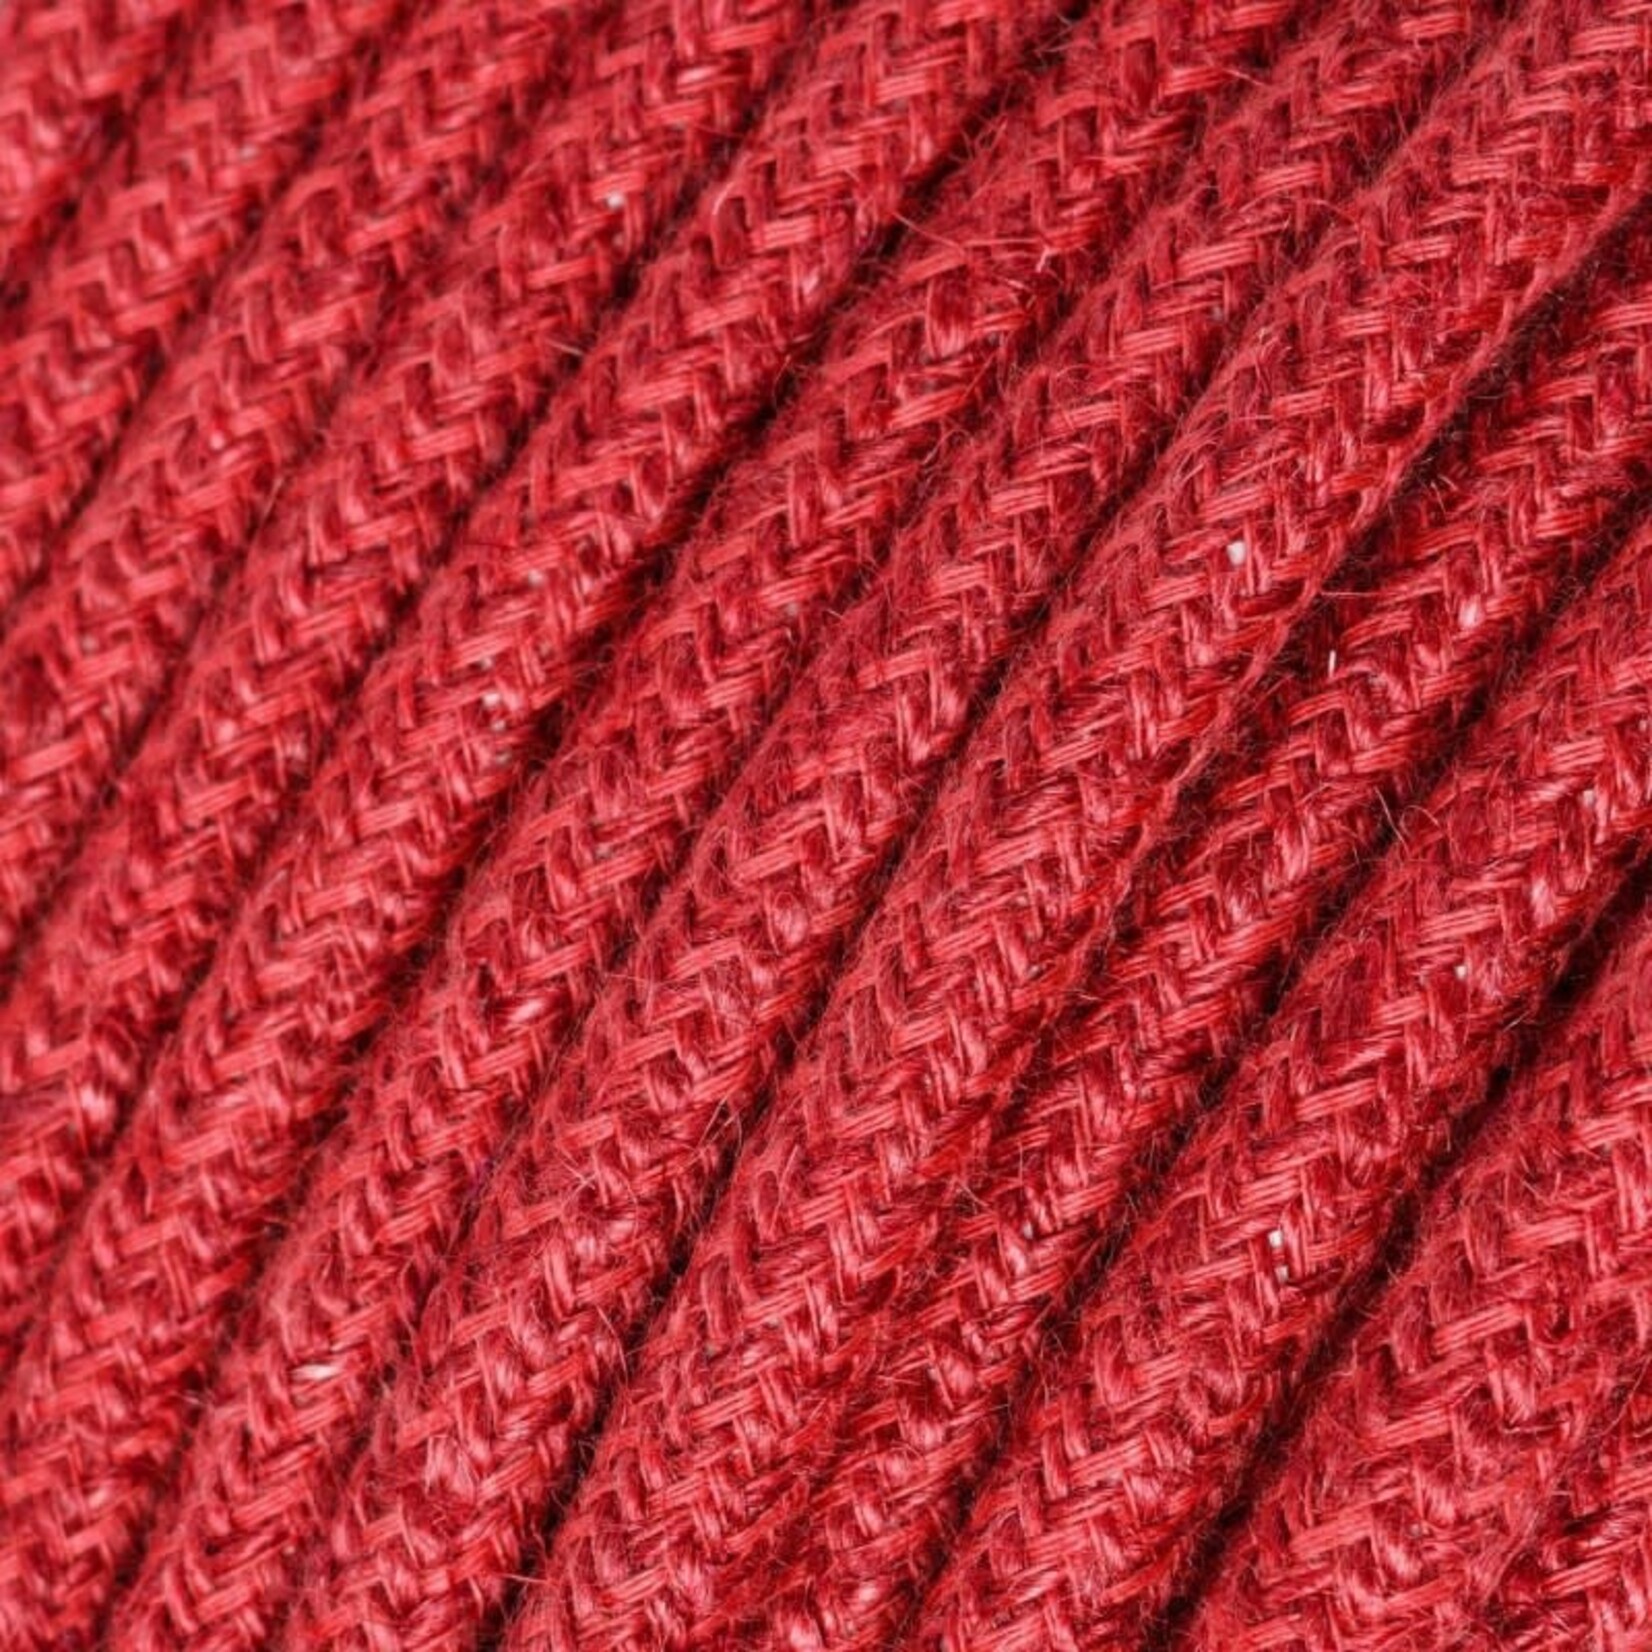 CCIT PER METRE Round electric Cable Flex covered in Plain Cherry Red Jute - 3 core 3x0.75